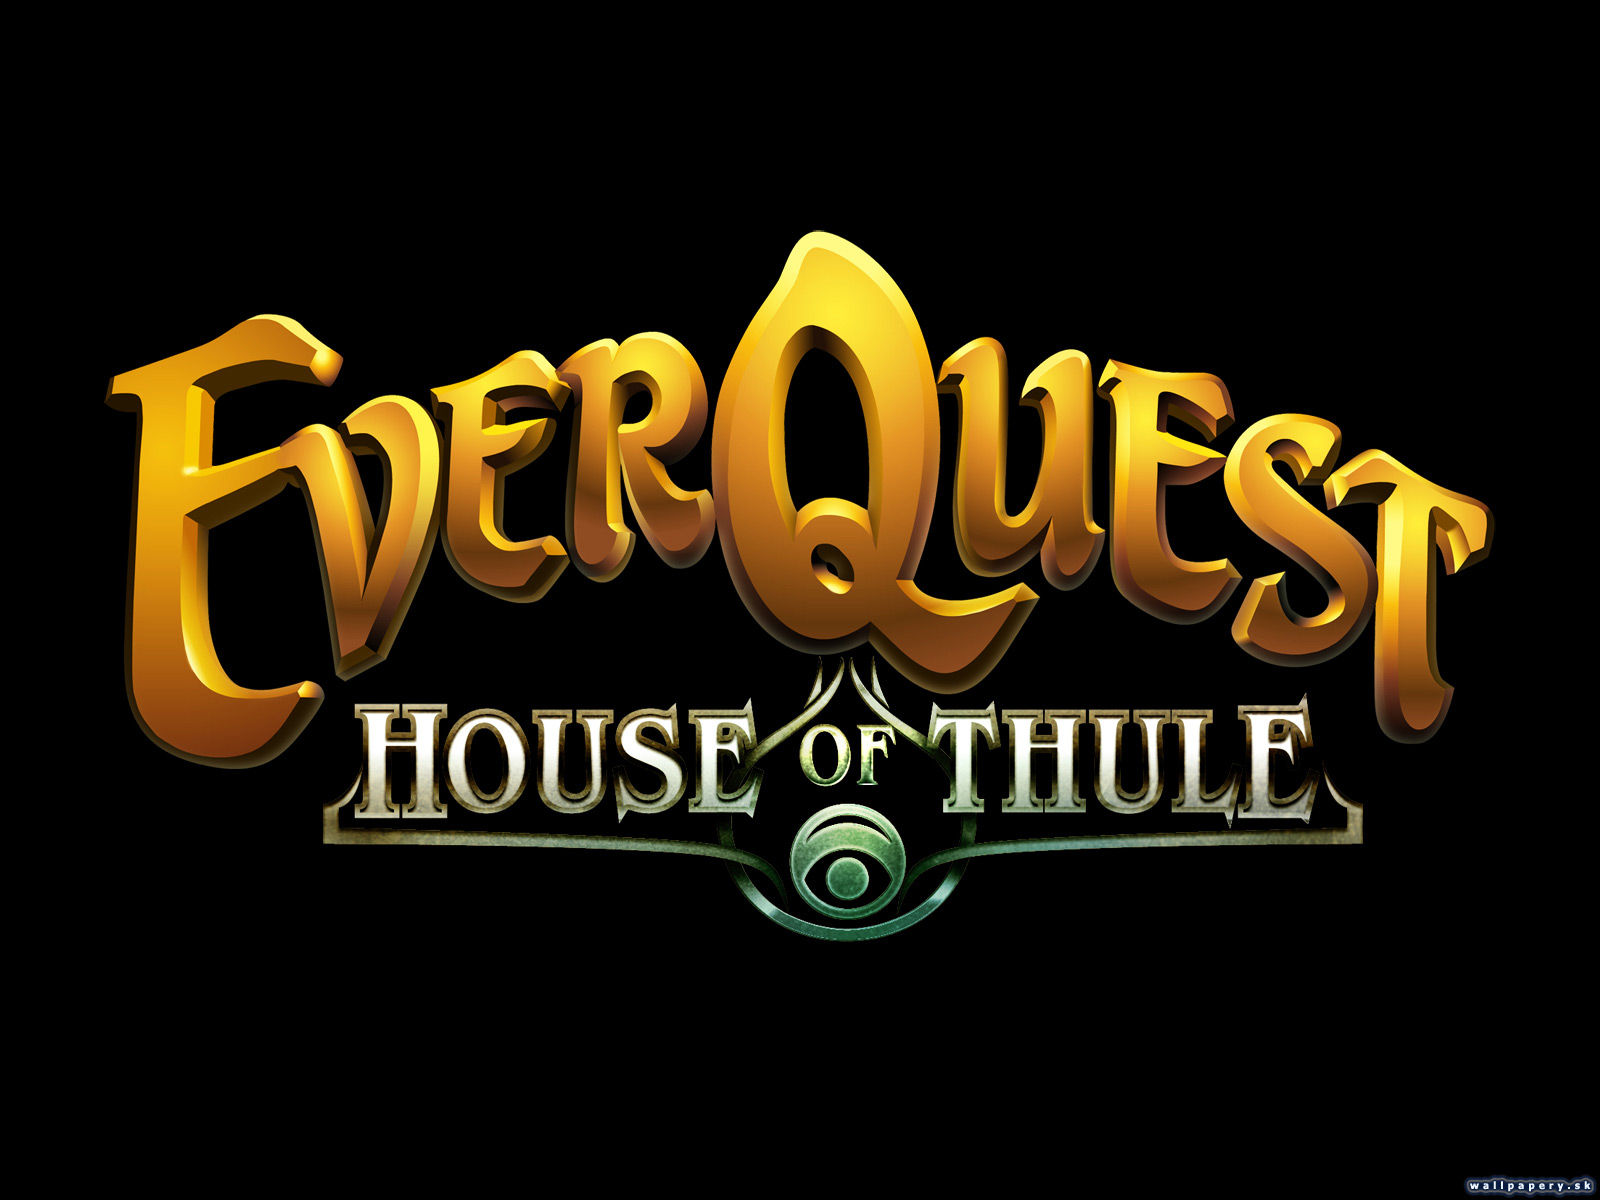 EverQuest: House of Thule - wallpaper 3